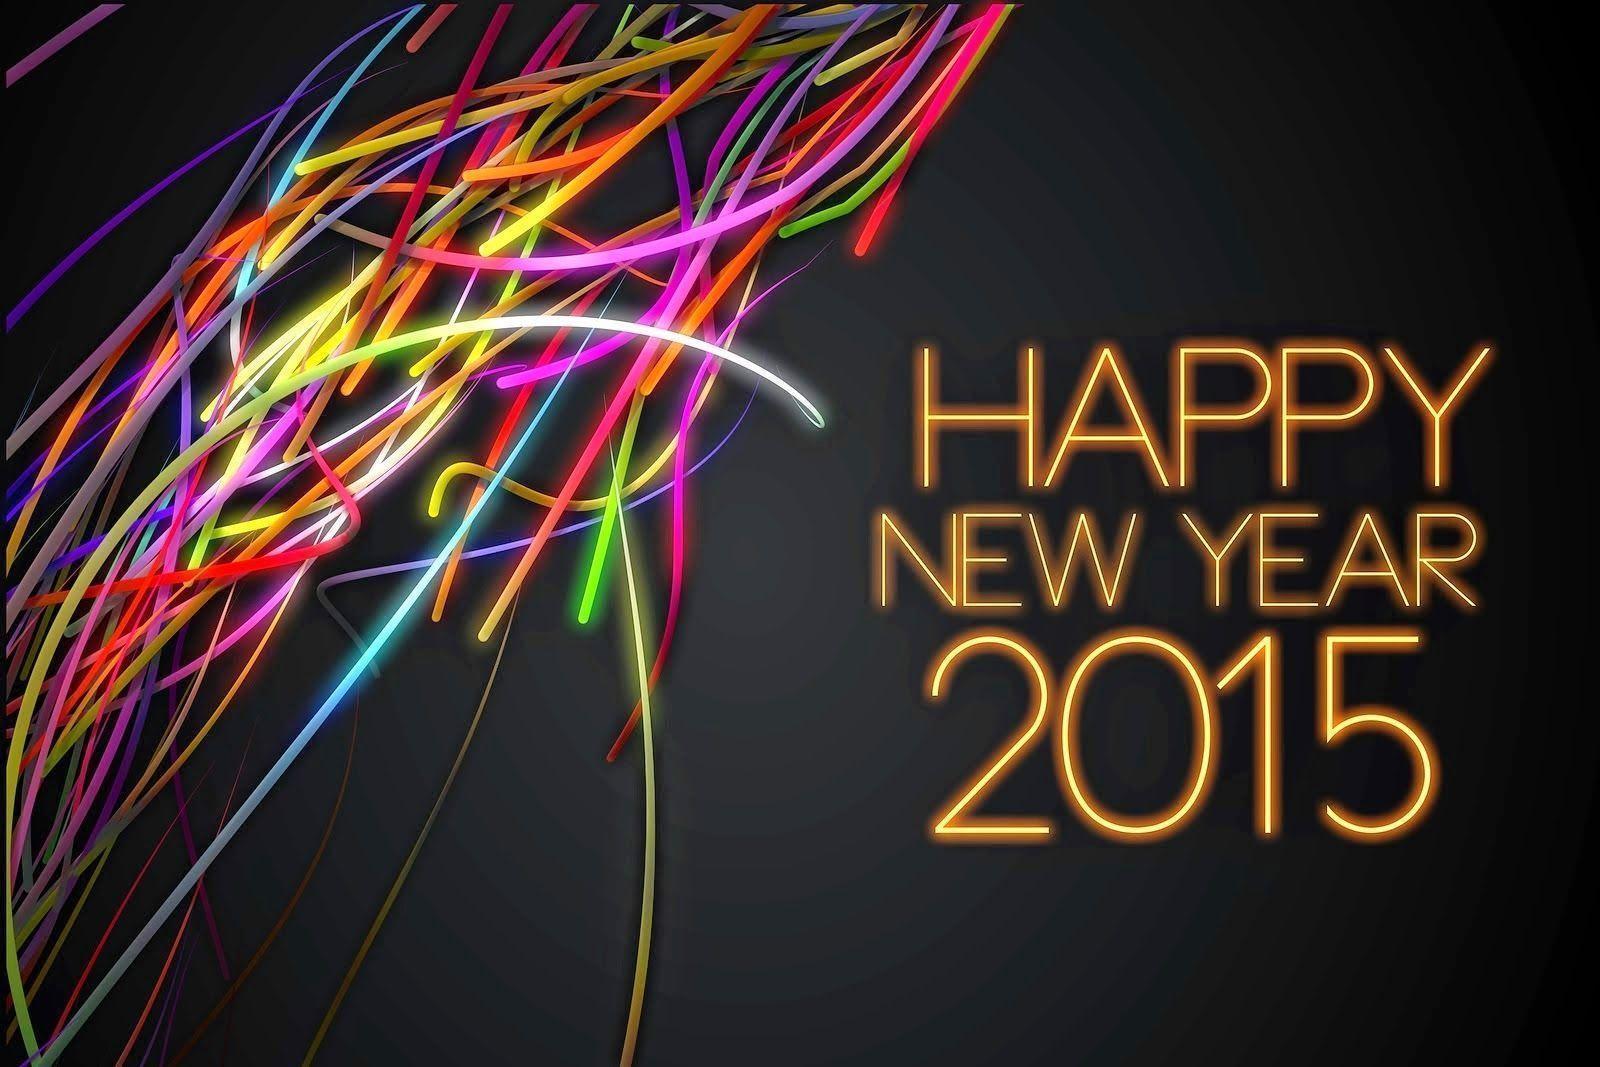 Happy New Year 2015 Quotes Status Greetings Wallpaper